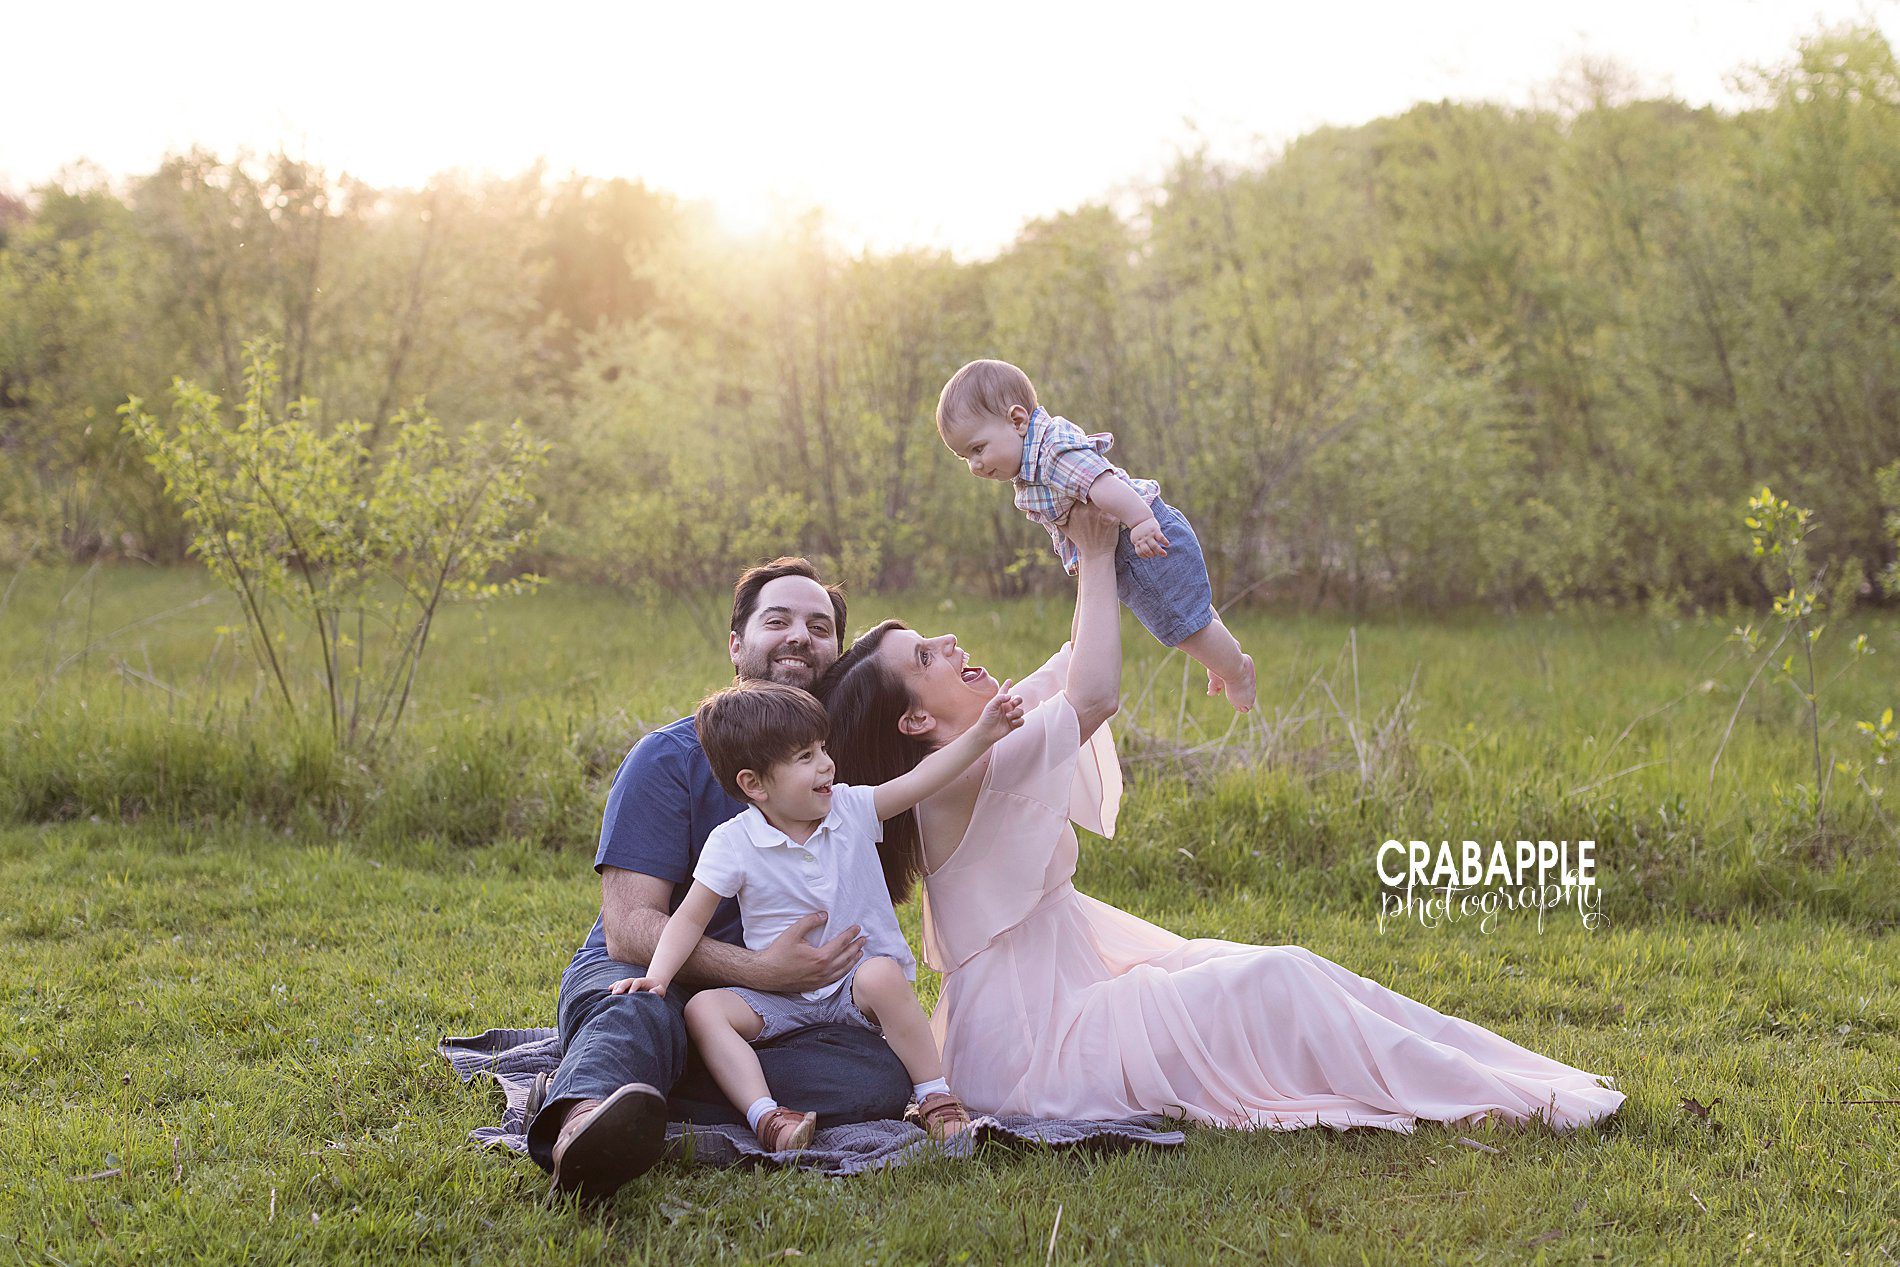 Fun ideas for outdoor springtime family pics with toddlers and babies.